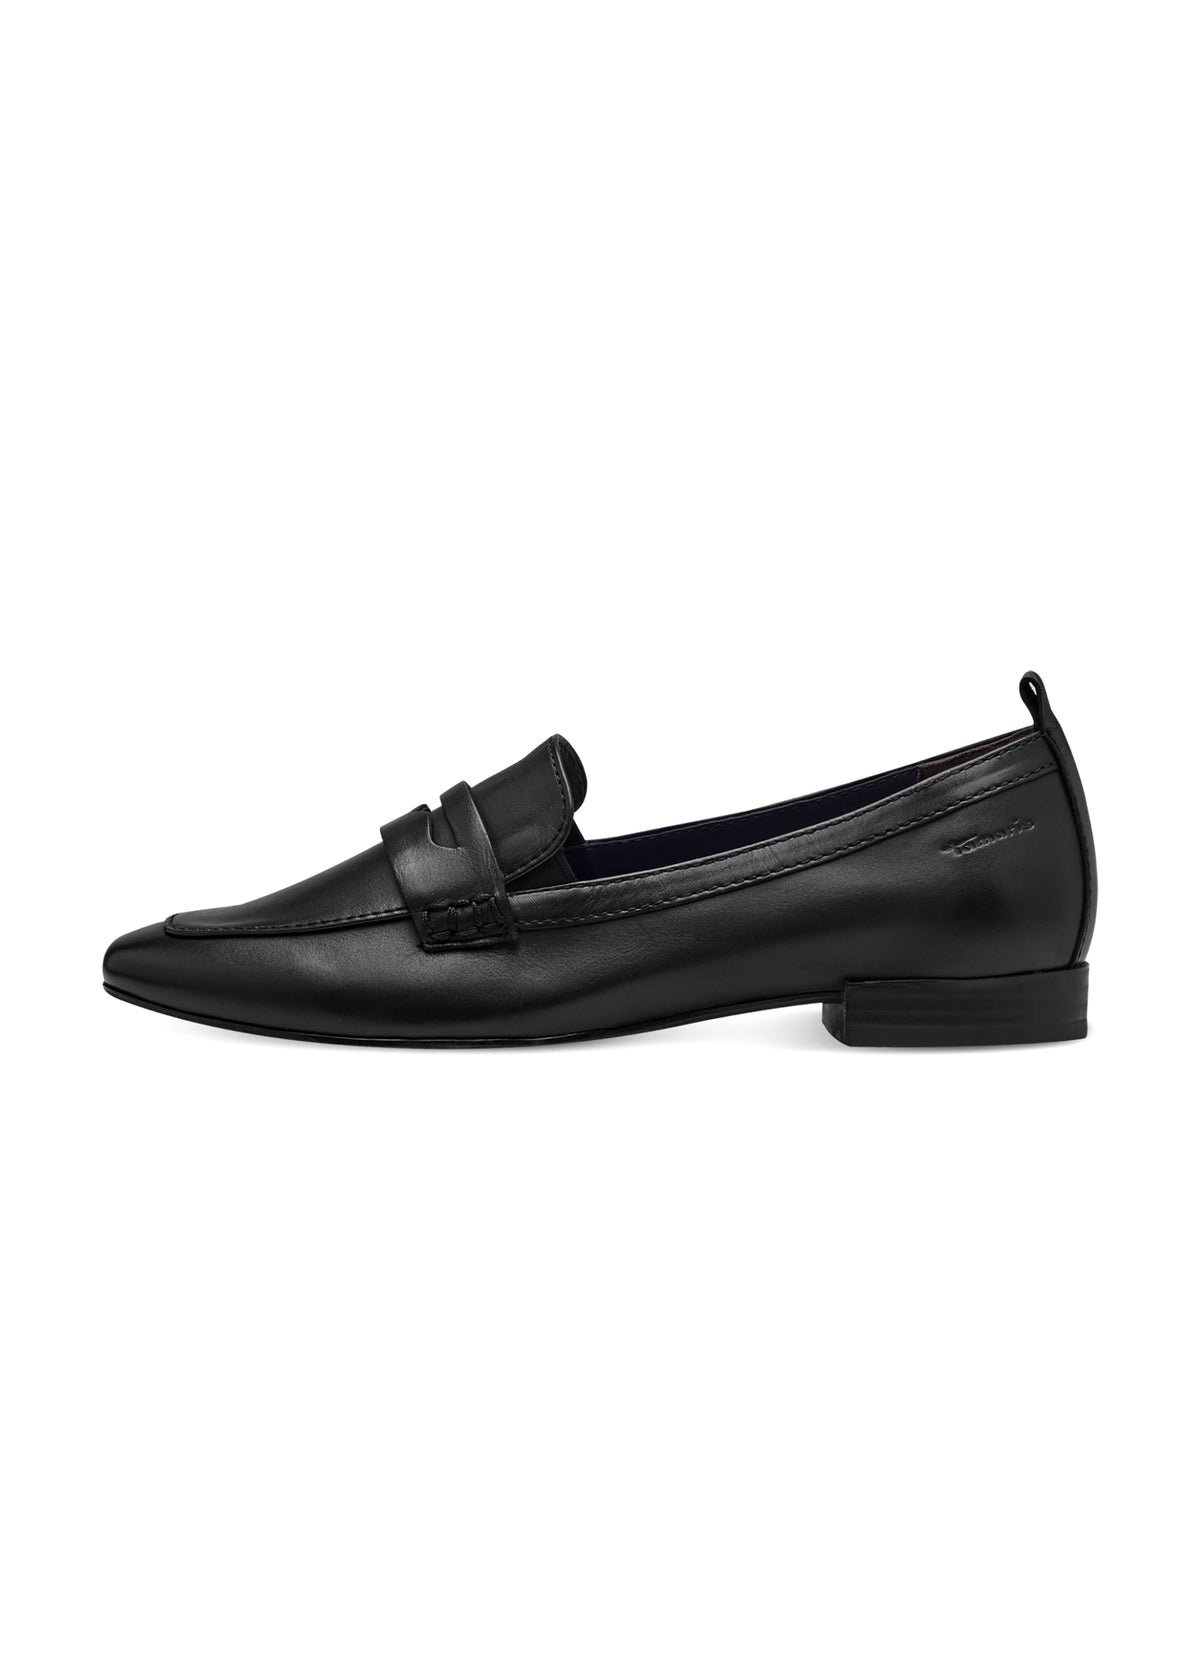 Loafers - black leather